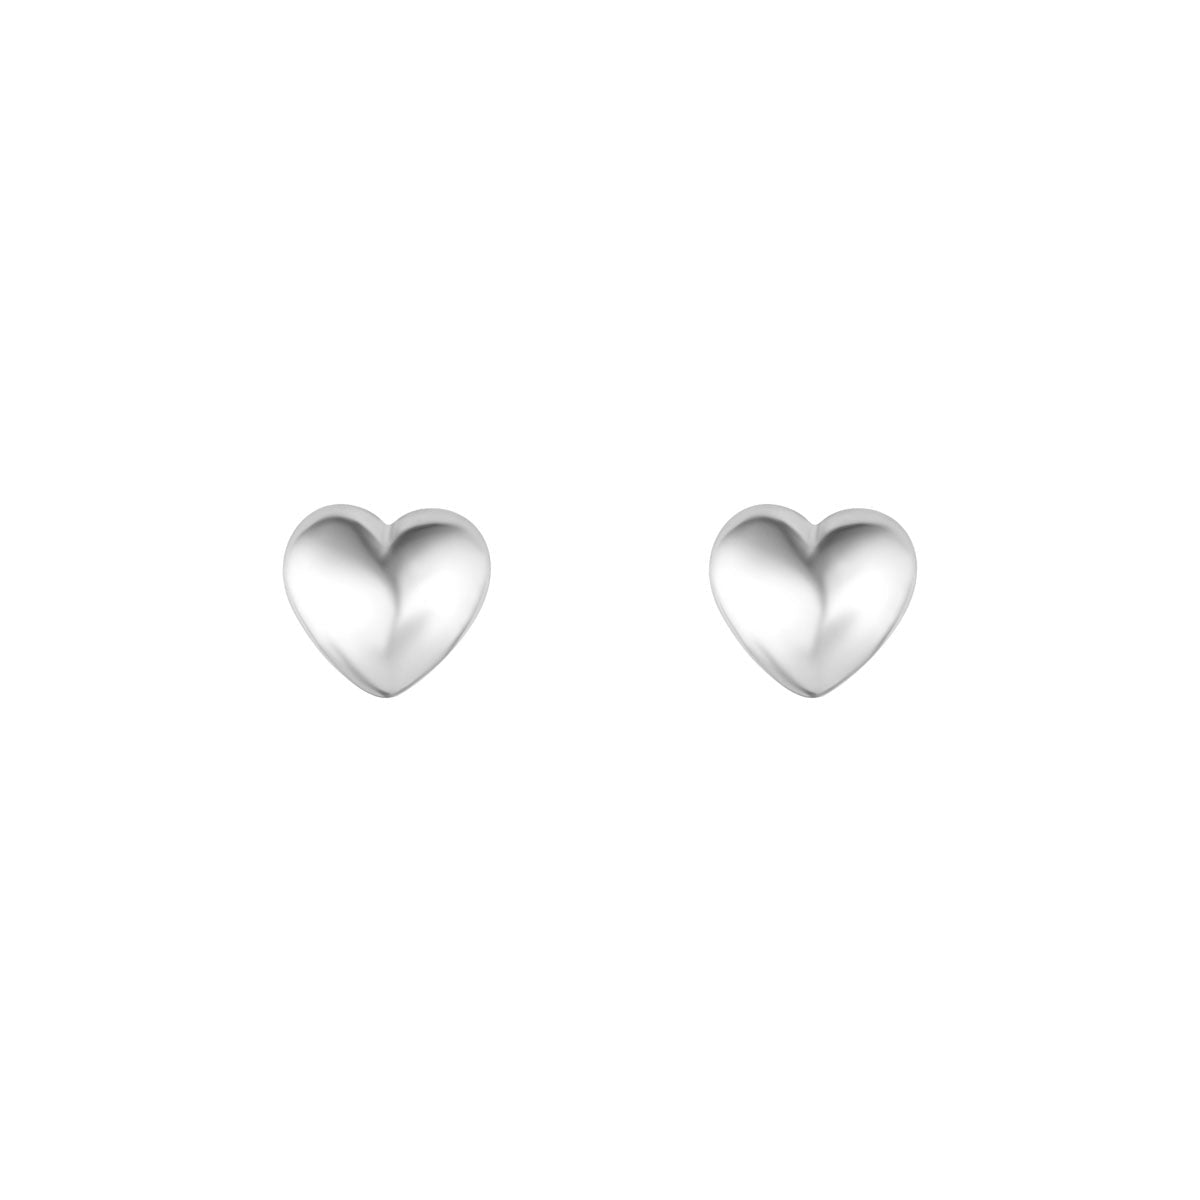 SILVER SOLID HEART STUD EARRINGS - A & M News and Gifts